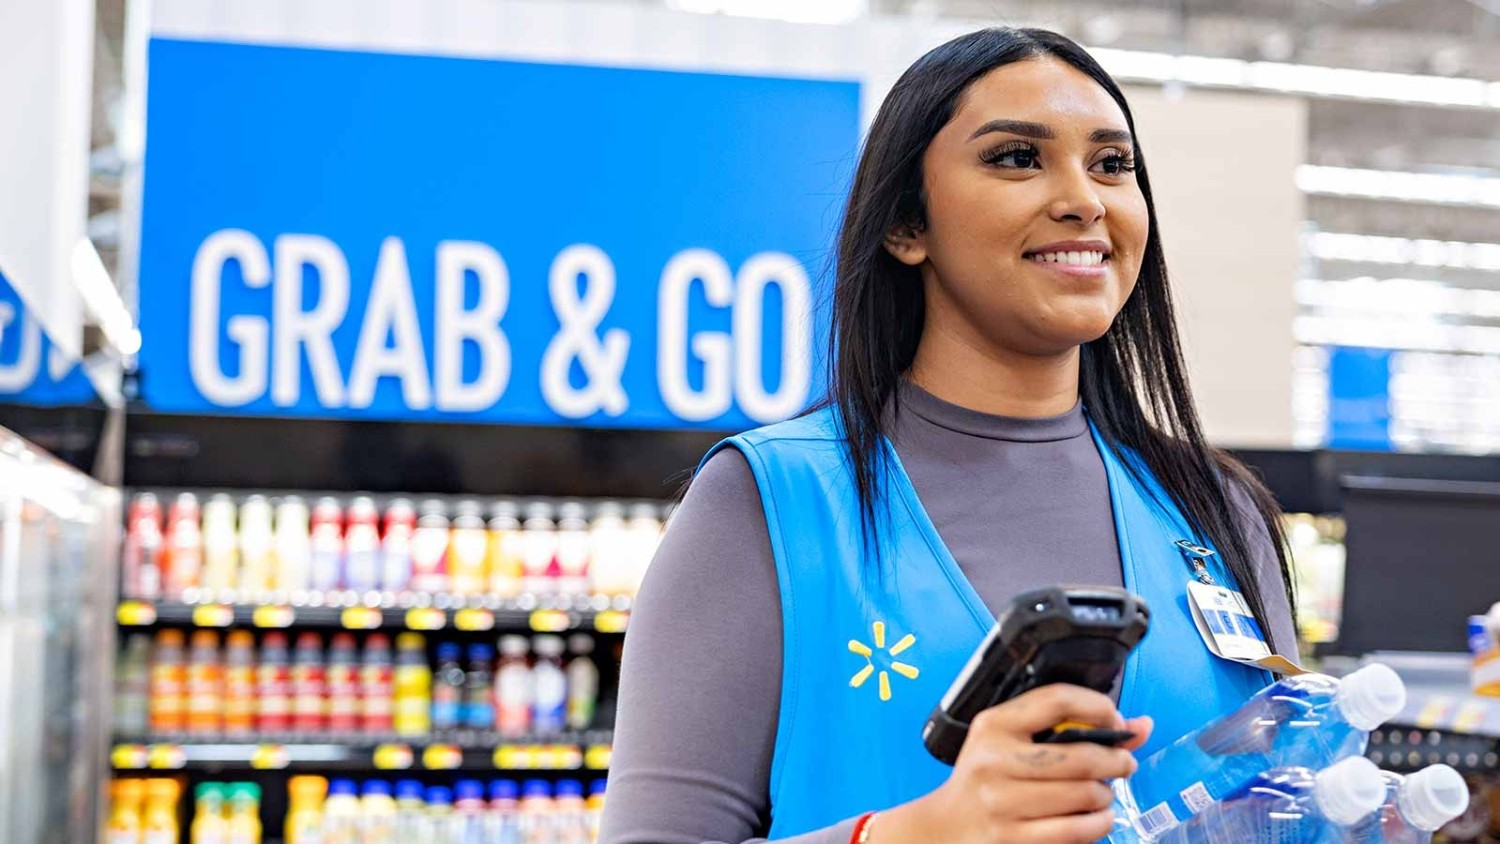 A Walmart associate stands in the Grab & Go section with a handheld scanner and water bottles in her hand.